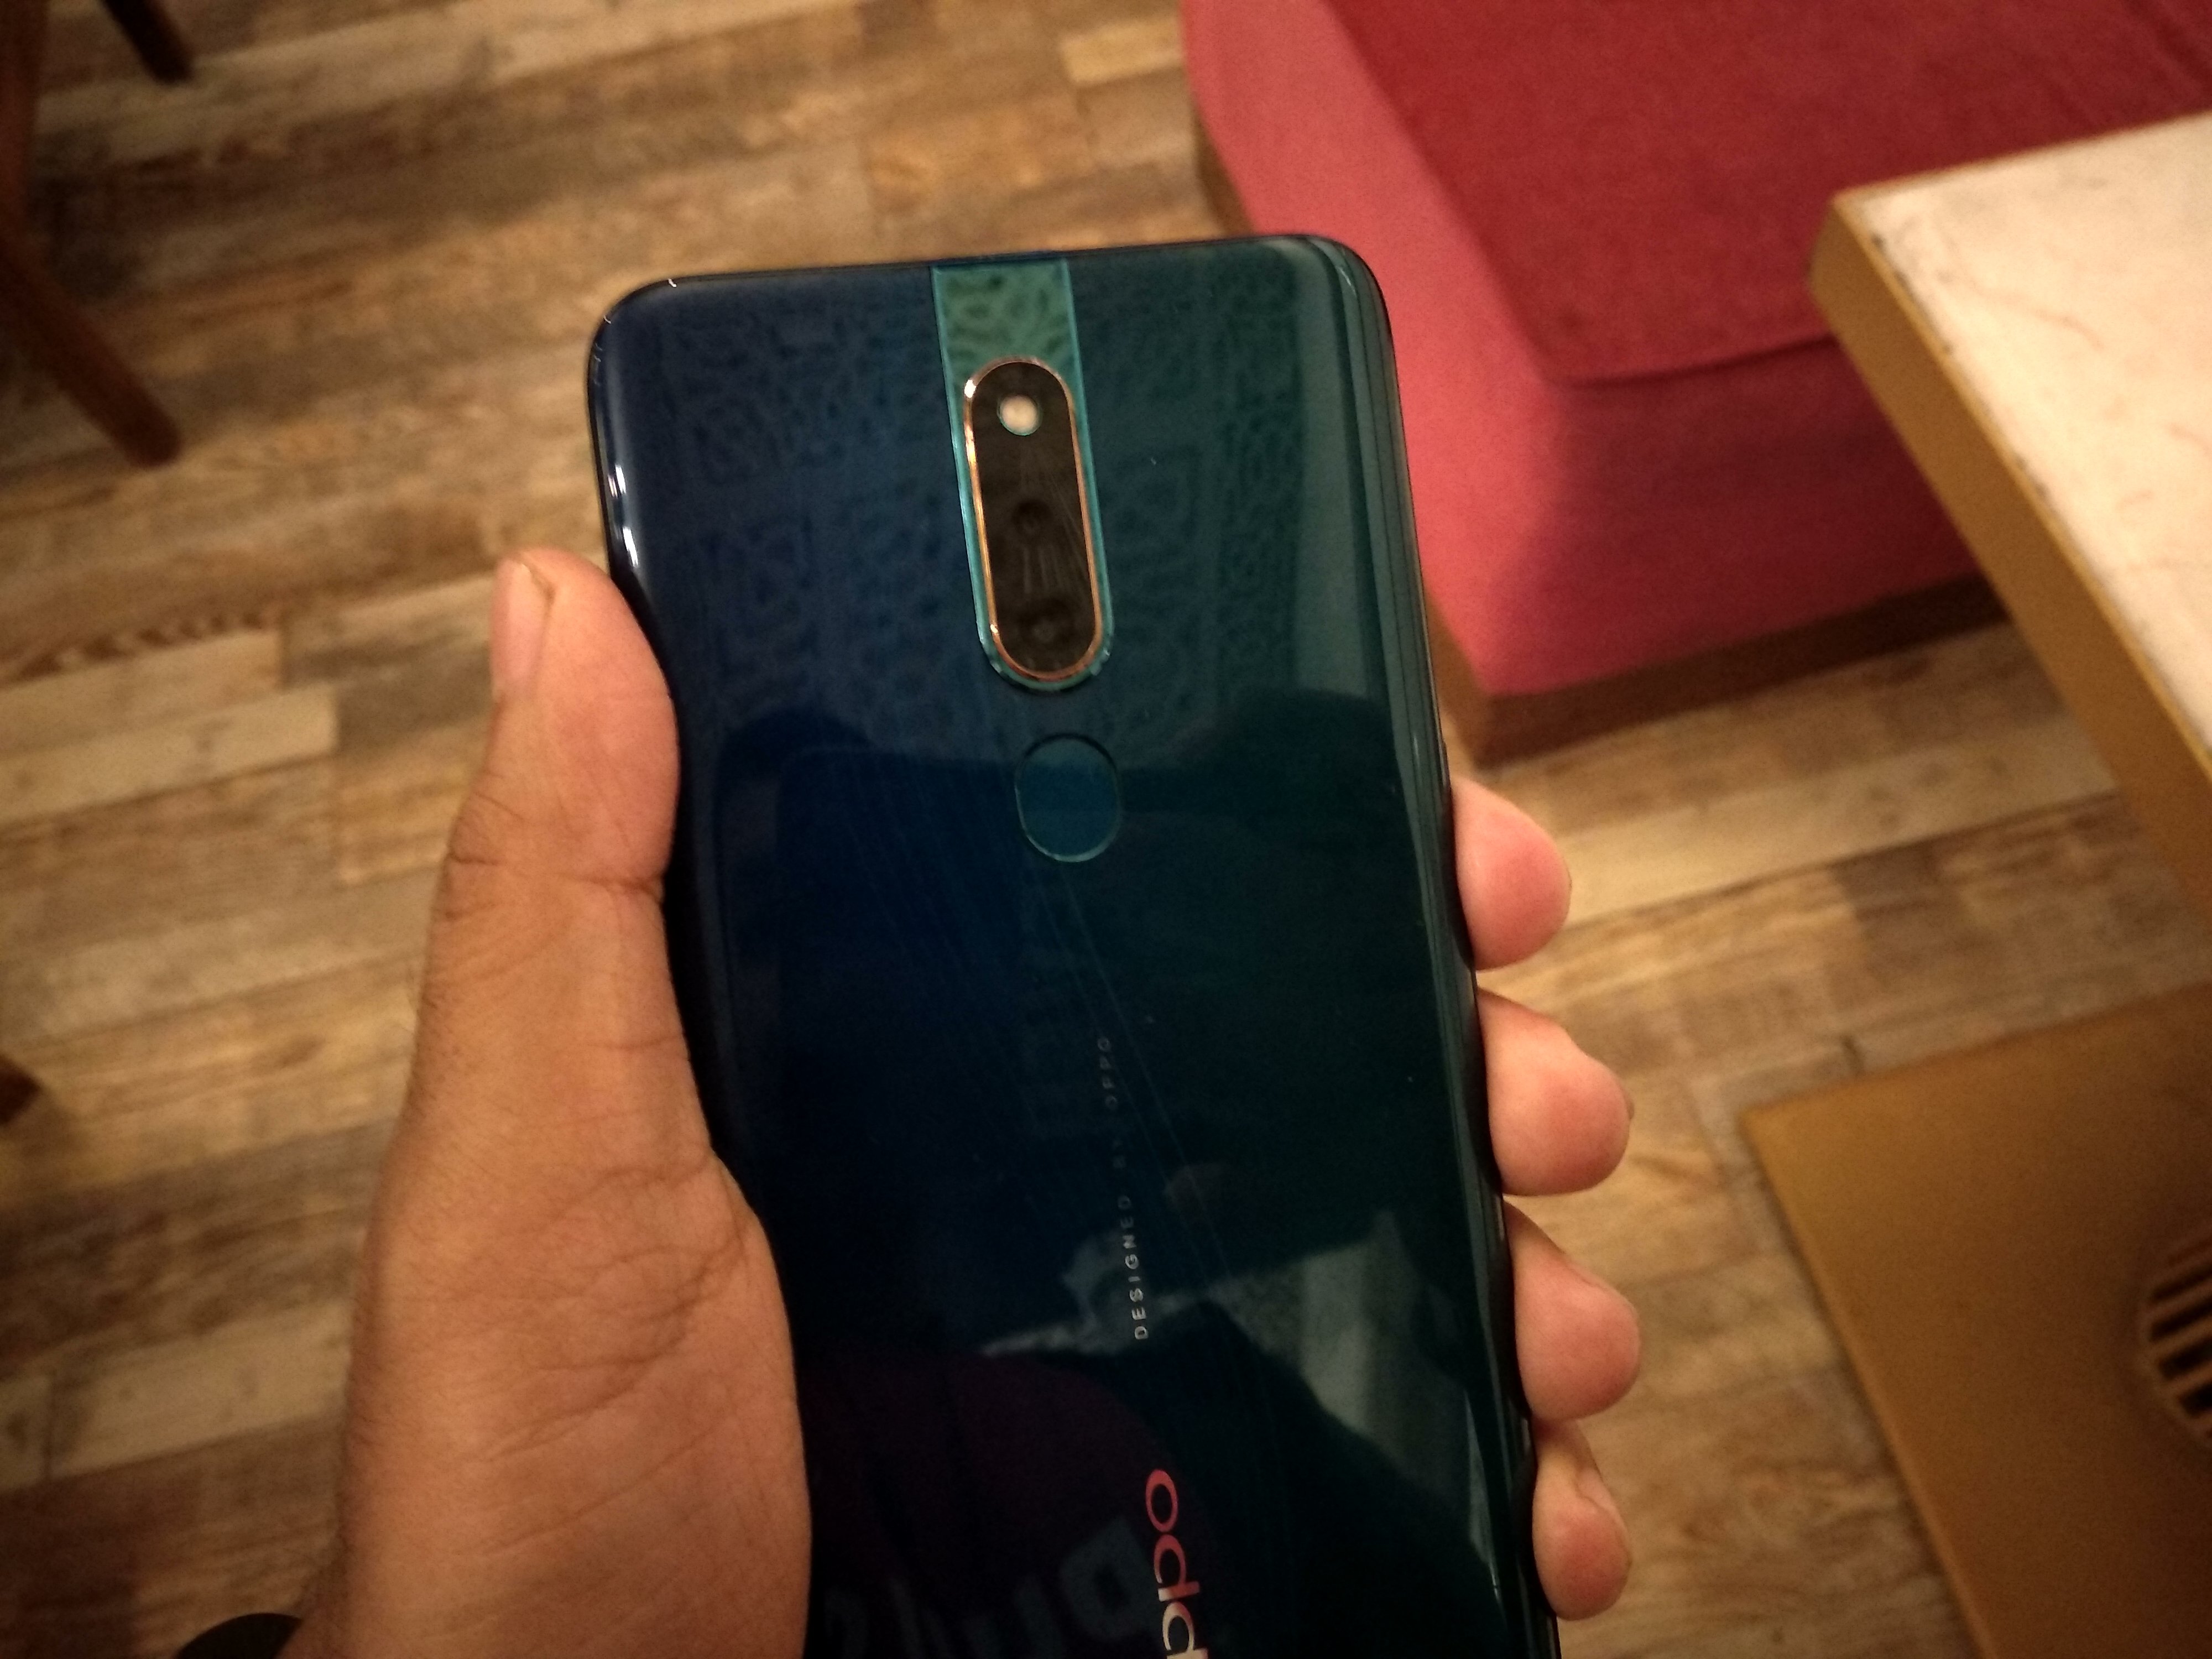 OPPO F11 Pro Hands-On